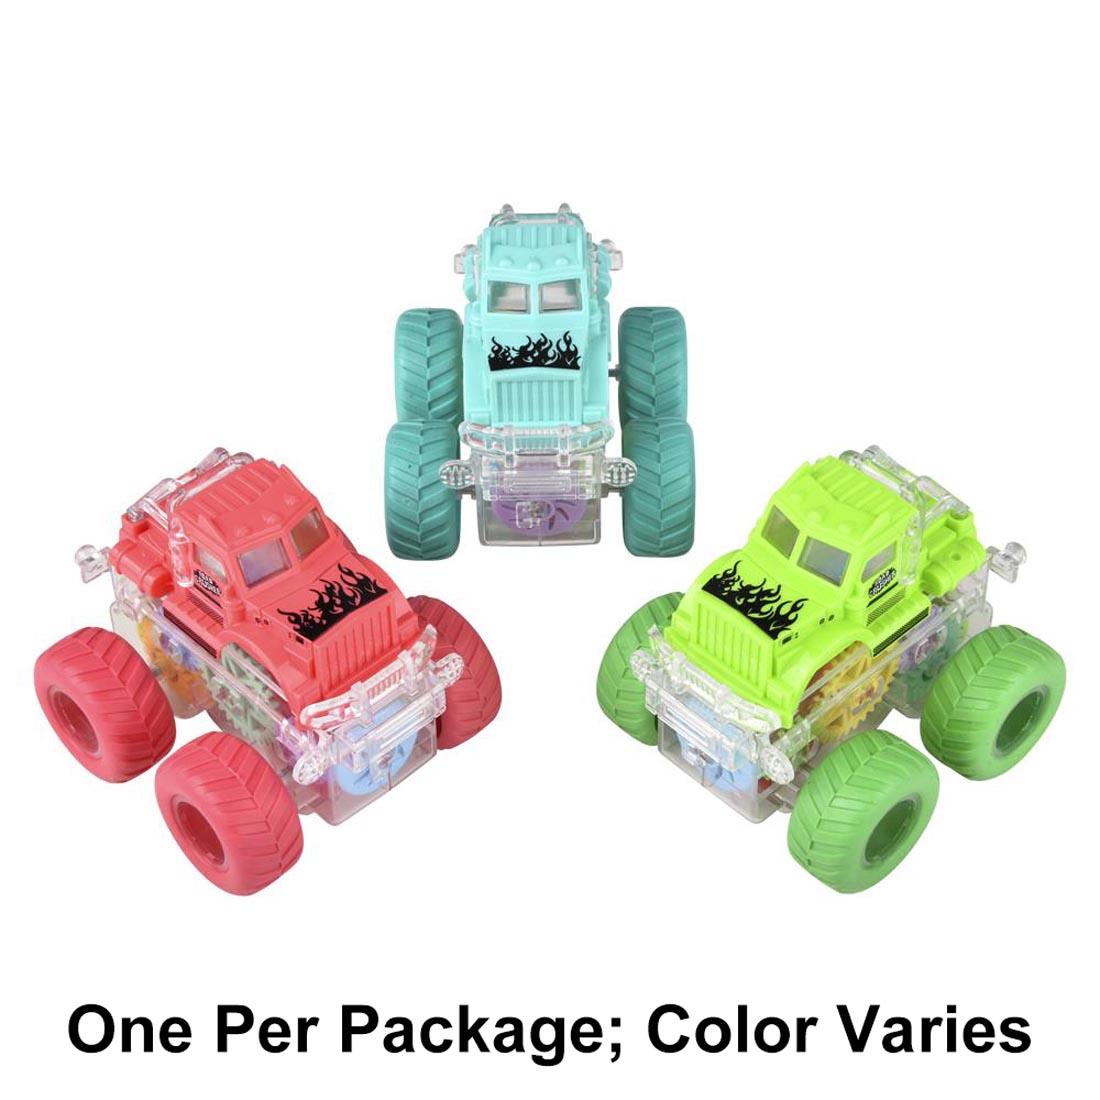 Three Friction Gear Light-Up Big Wheel Toy Trucks with text One Per Package; Color Varies